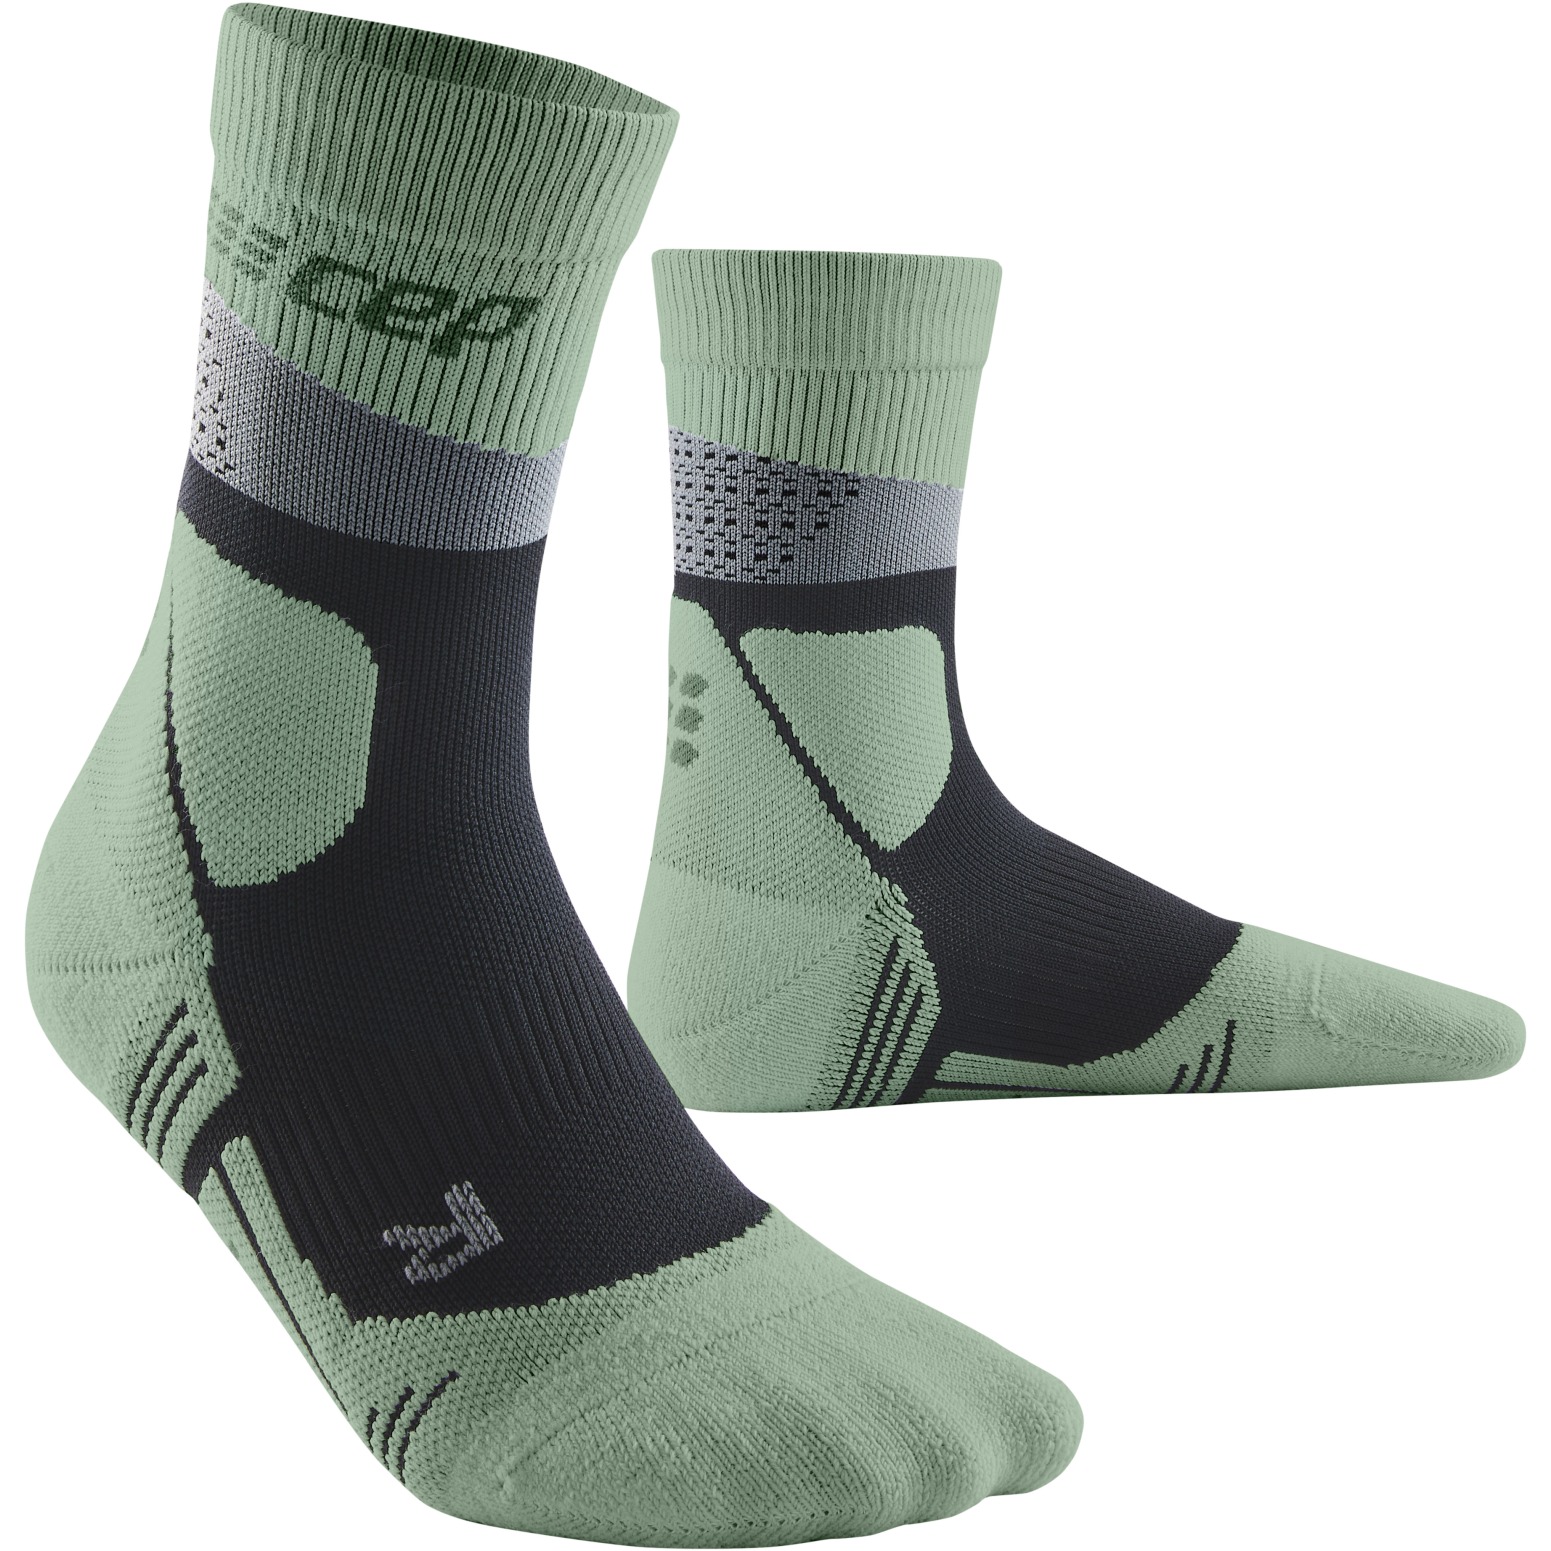 Picture of CEP Max Cushion Hiking Mid Cut Compression Socks Women - grey/mint